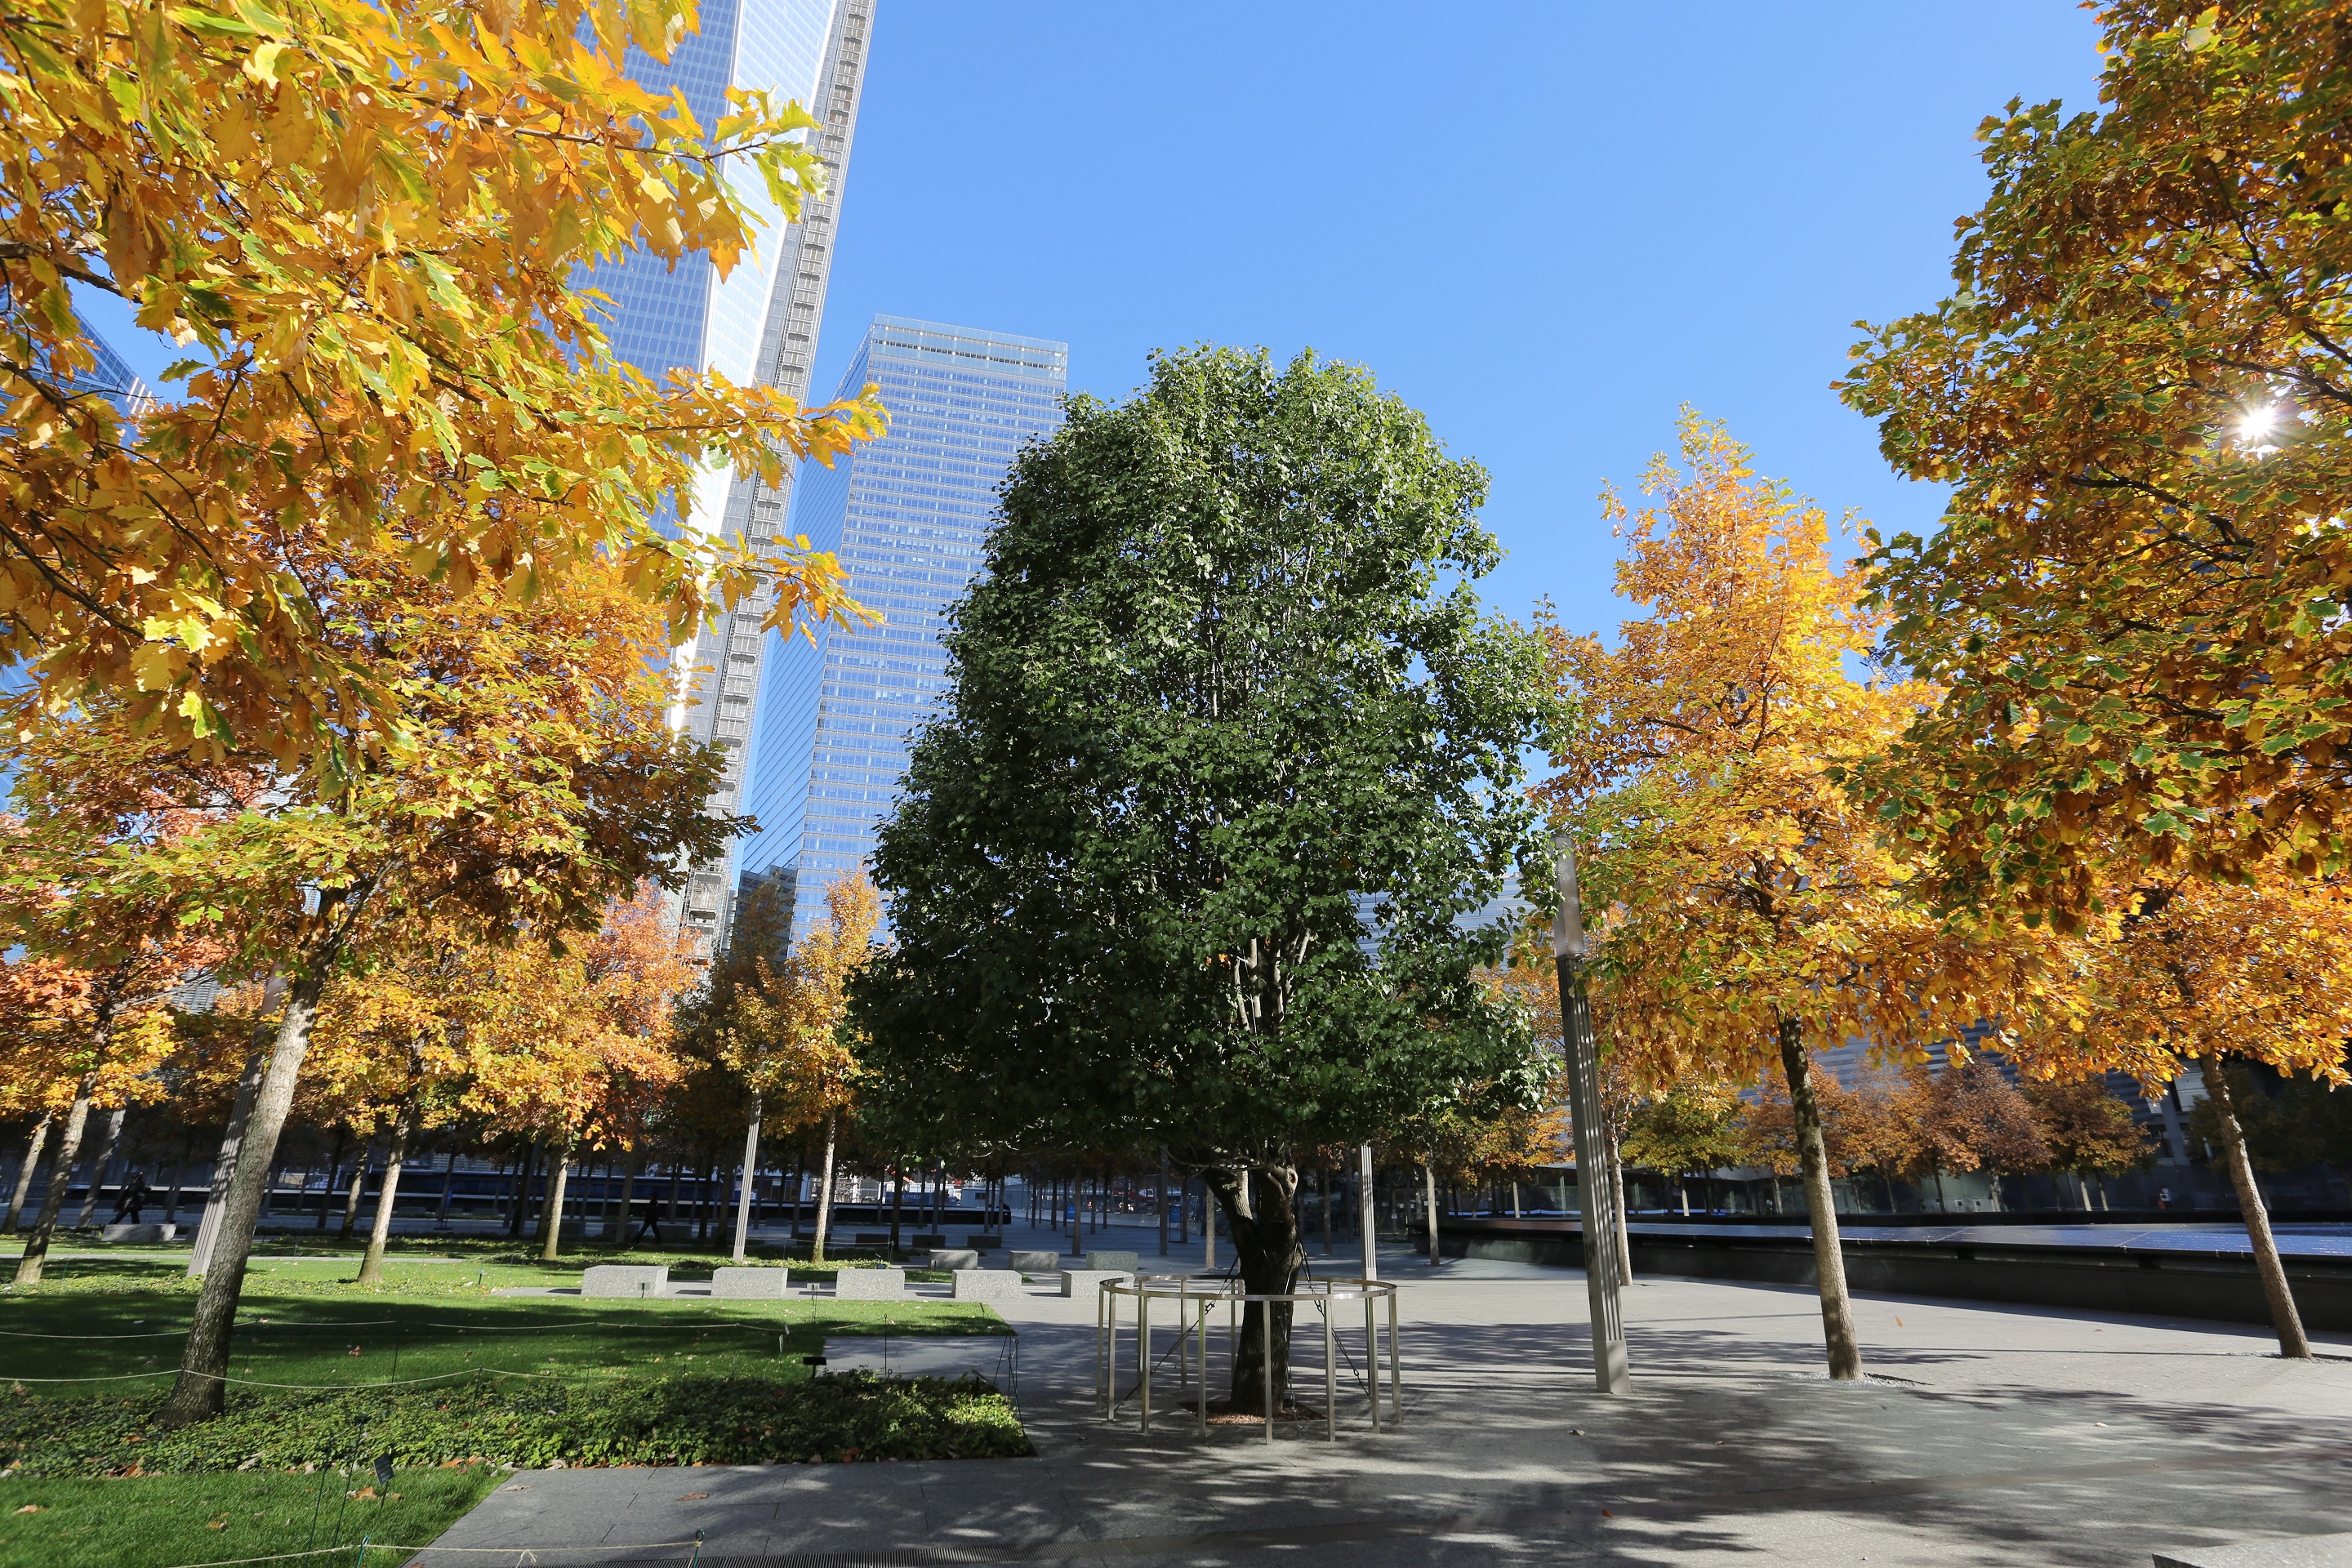 The Survivor Tree and the Glade at Ground Zero 